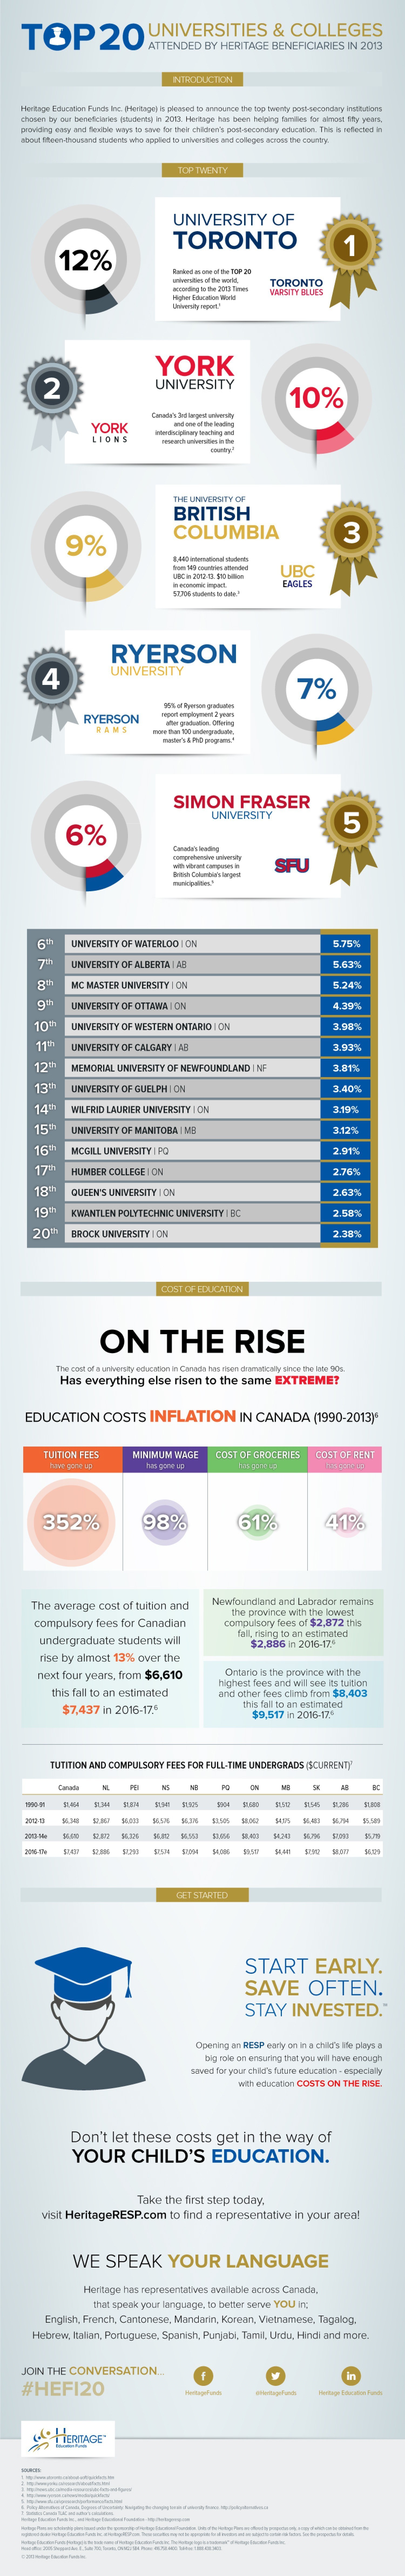 Canada Top 20 Universities and Colleges Infographic